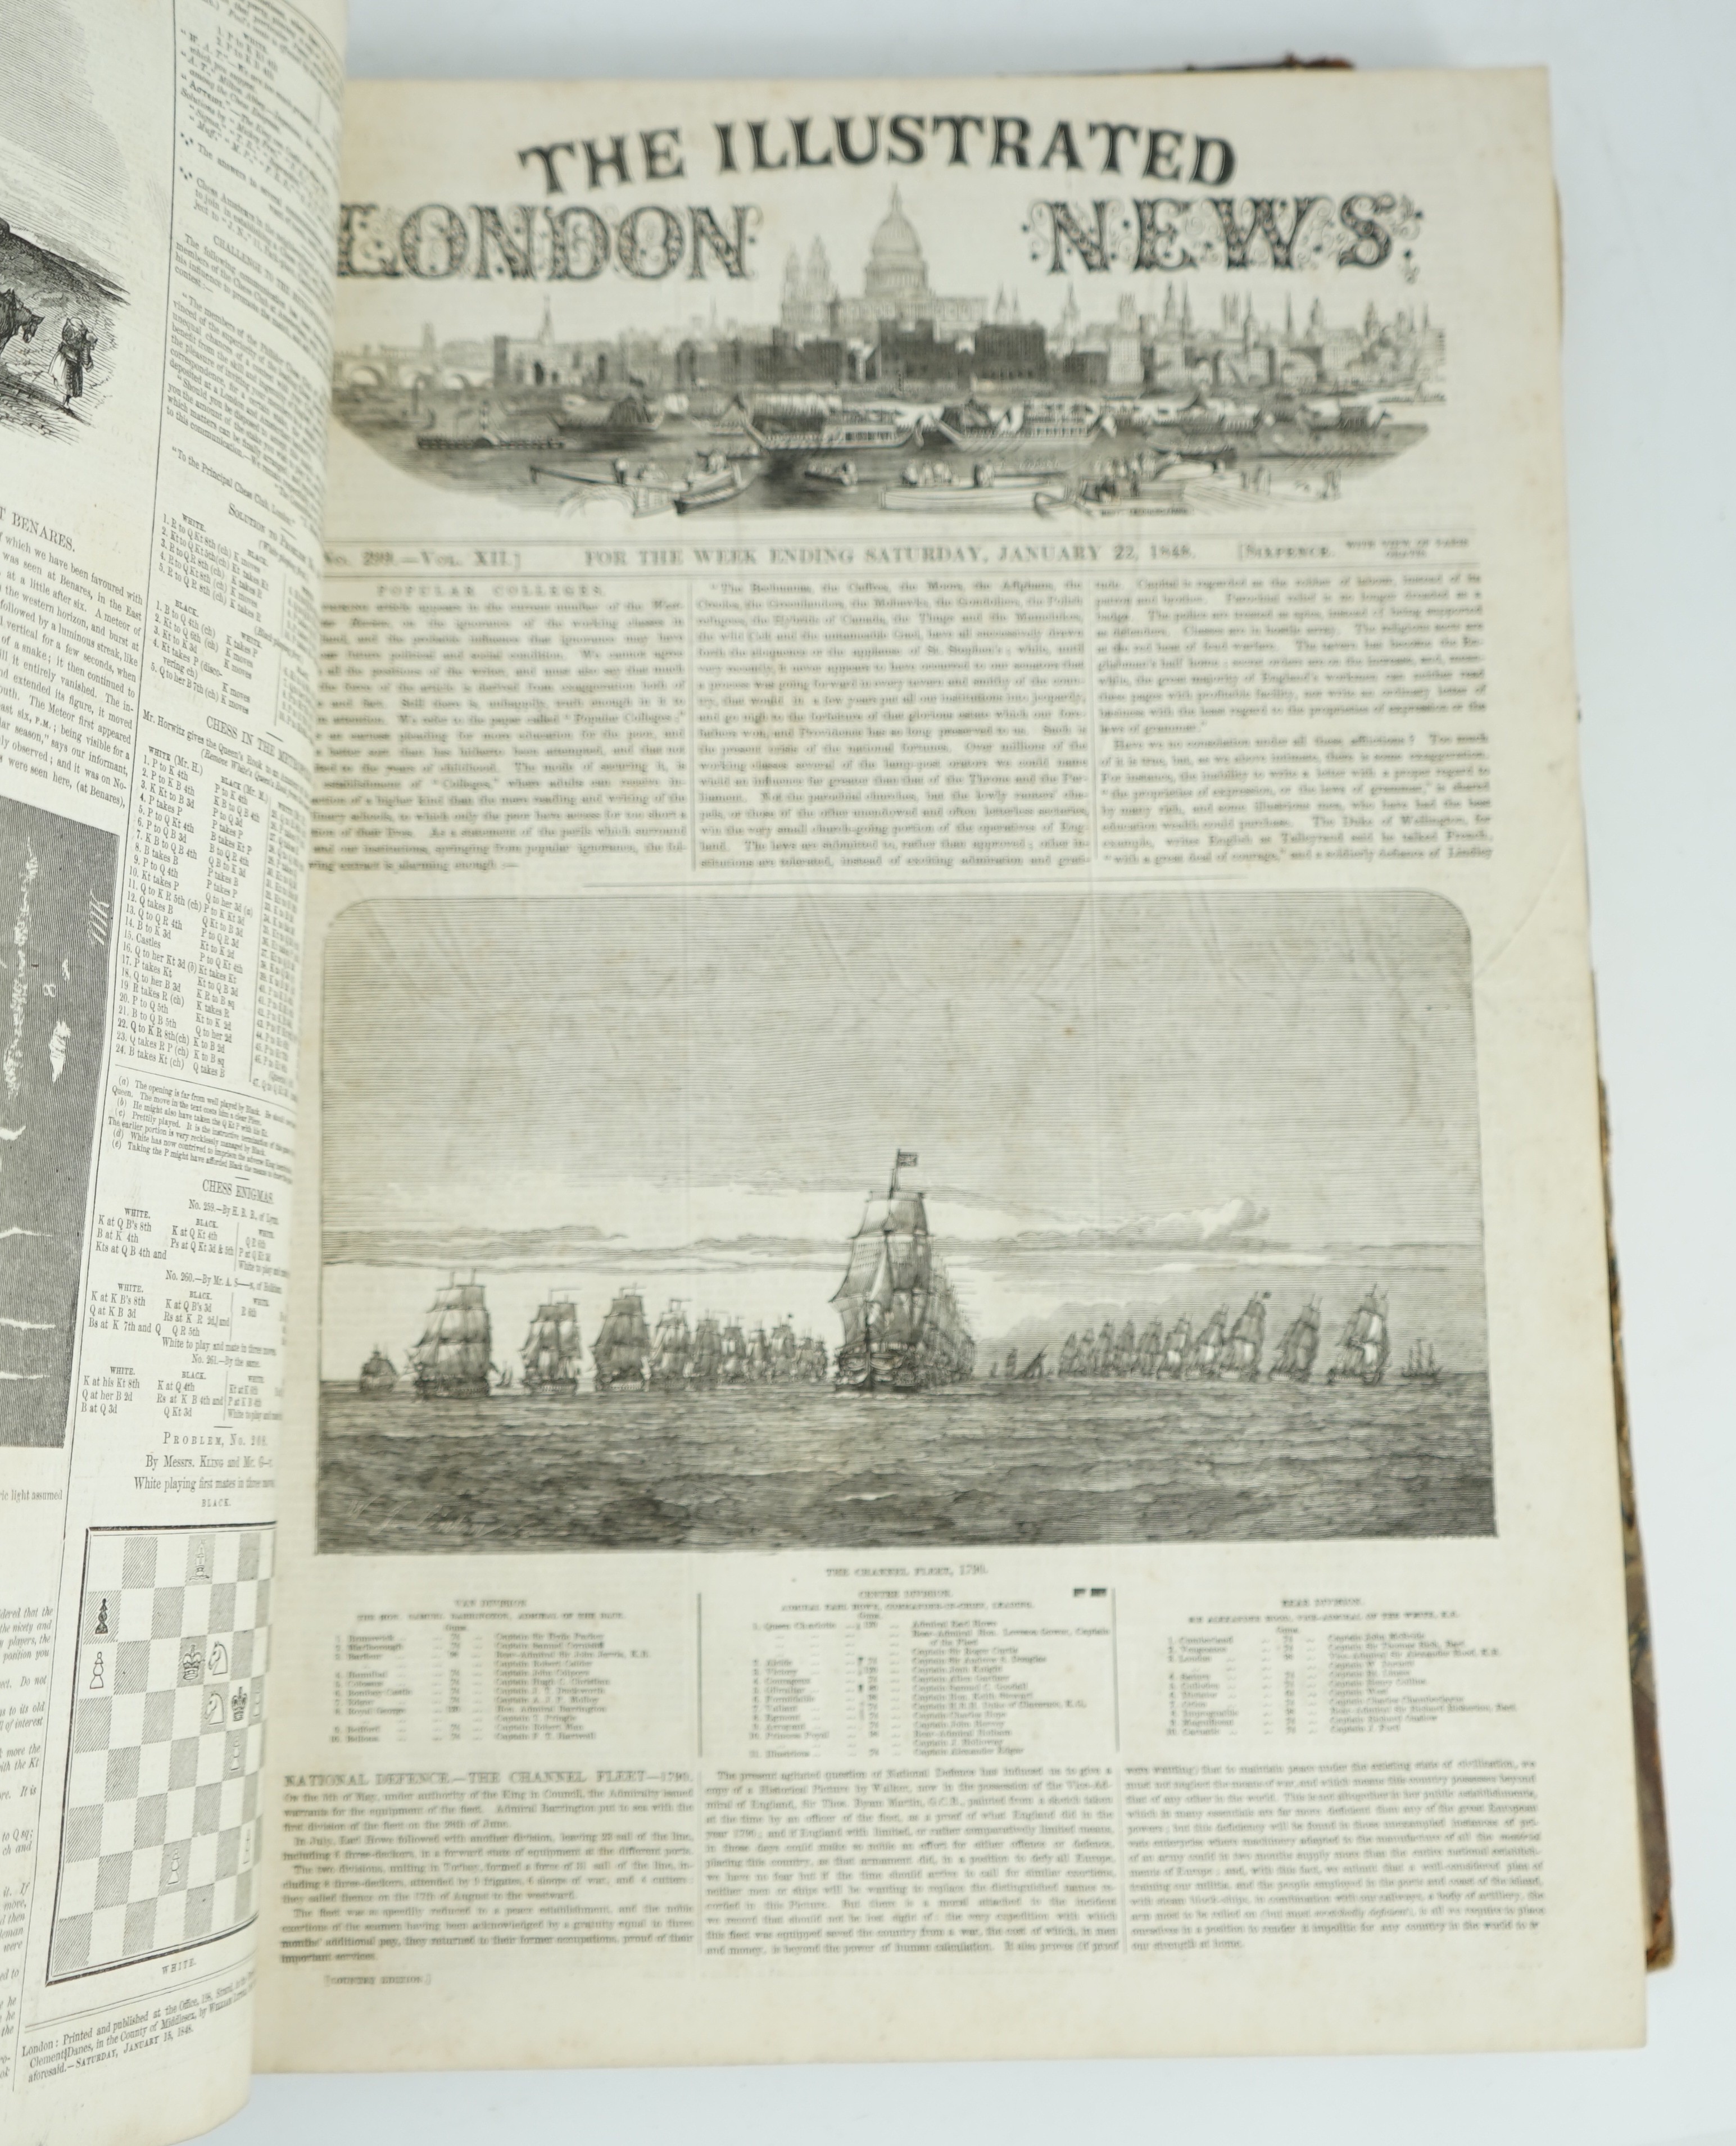 The Illustrated London News, vol.12 (Jan. to June 1848). pictorial engraved title and wood engraved illus. throughout and with large folded panoramic frontispiece (Paris in 1848); old half leather and marbled boards, fol